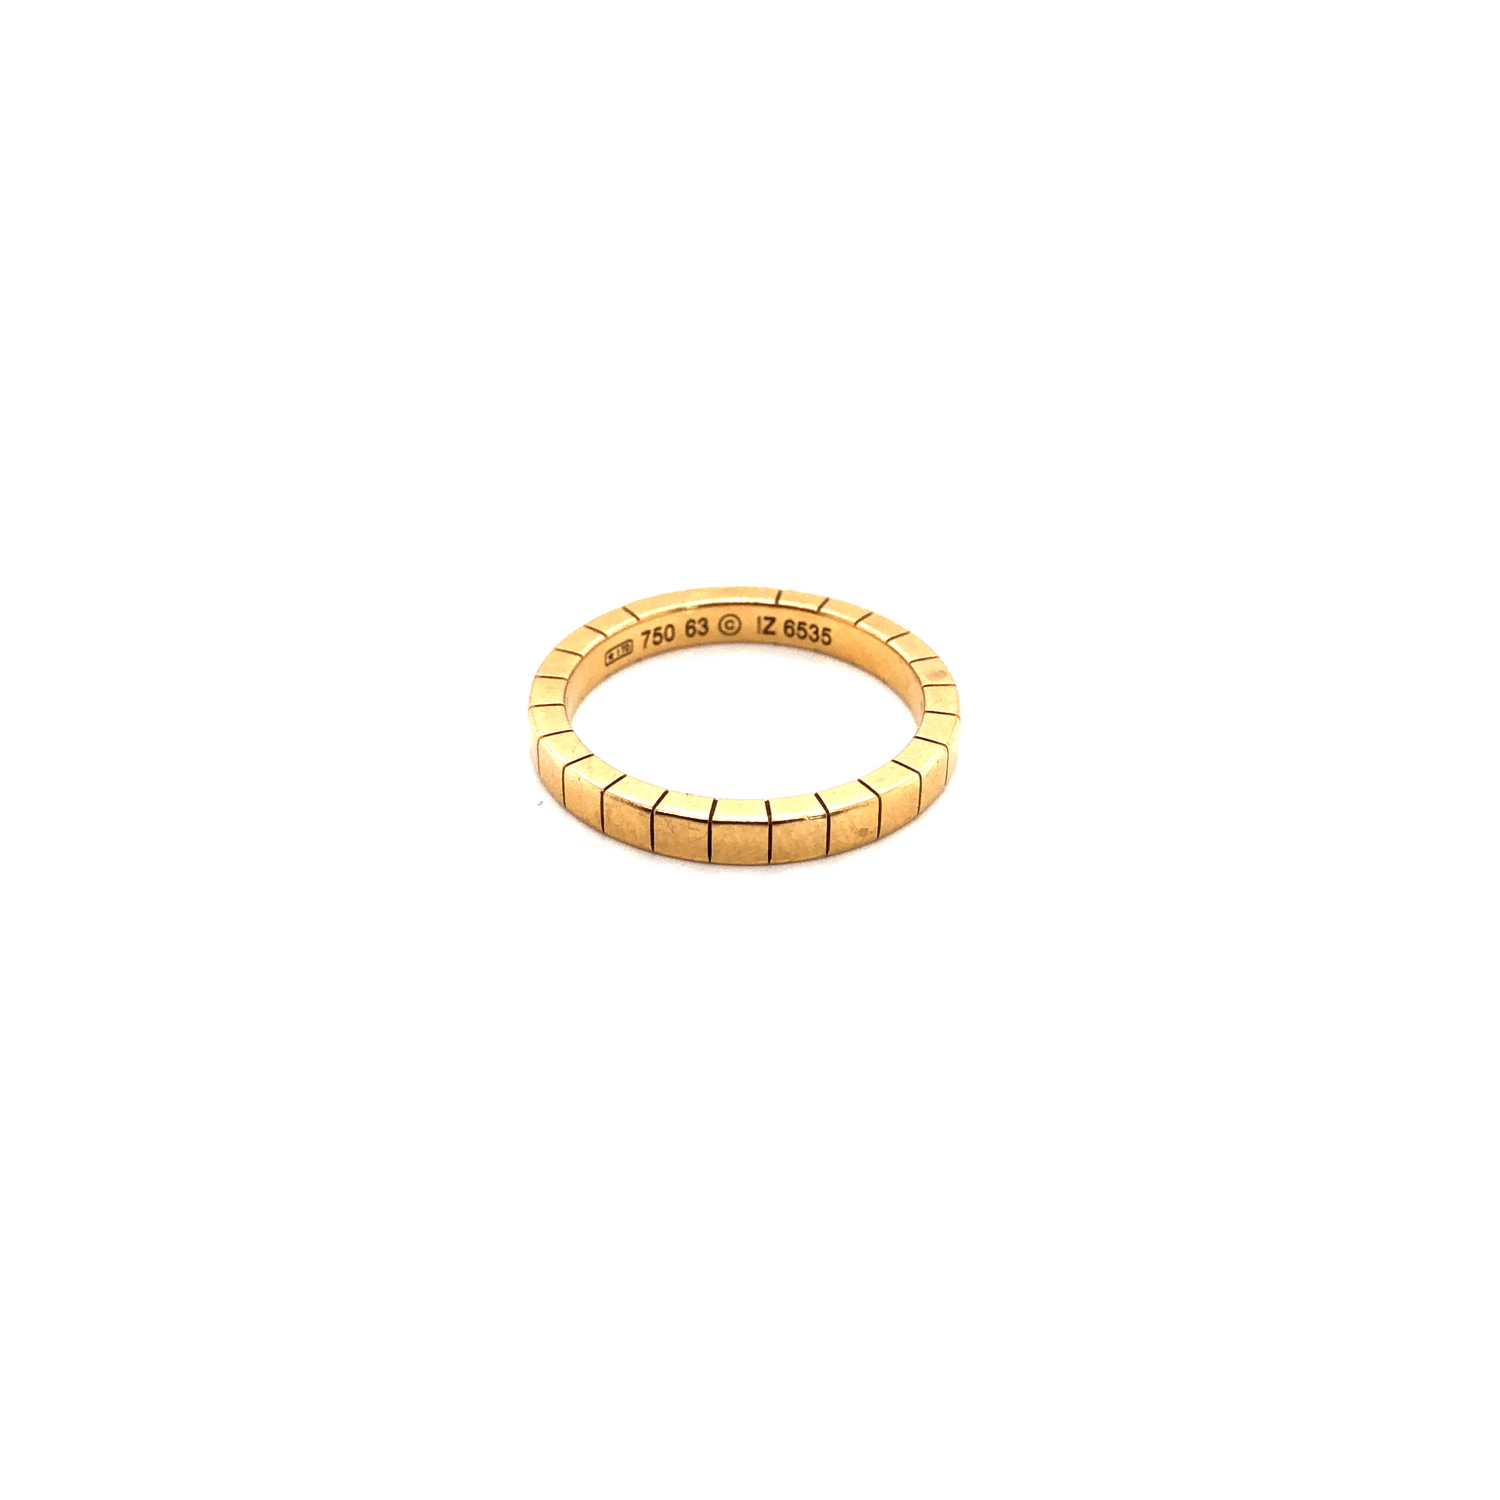 A VINTAGE CARTIER LANIERES BRICK LINK BAND RING. THE RING STAMPED 750, 63, 12, 6535. FINGER SIZE - Image 3 of 3